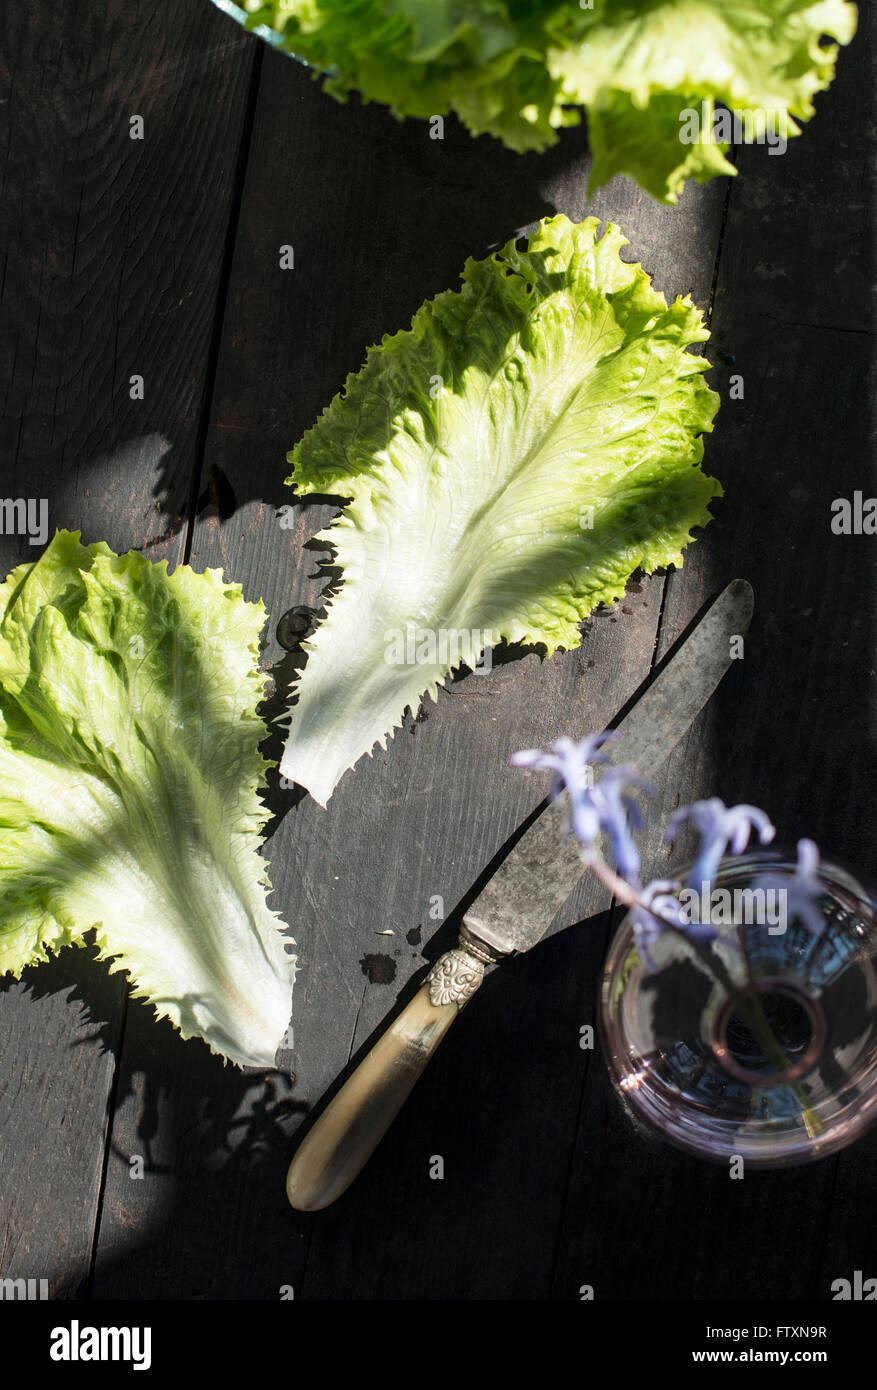 Lettuce leaves on wooden table Stock Photo